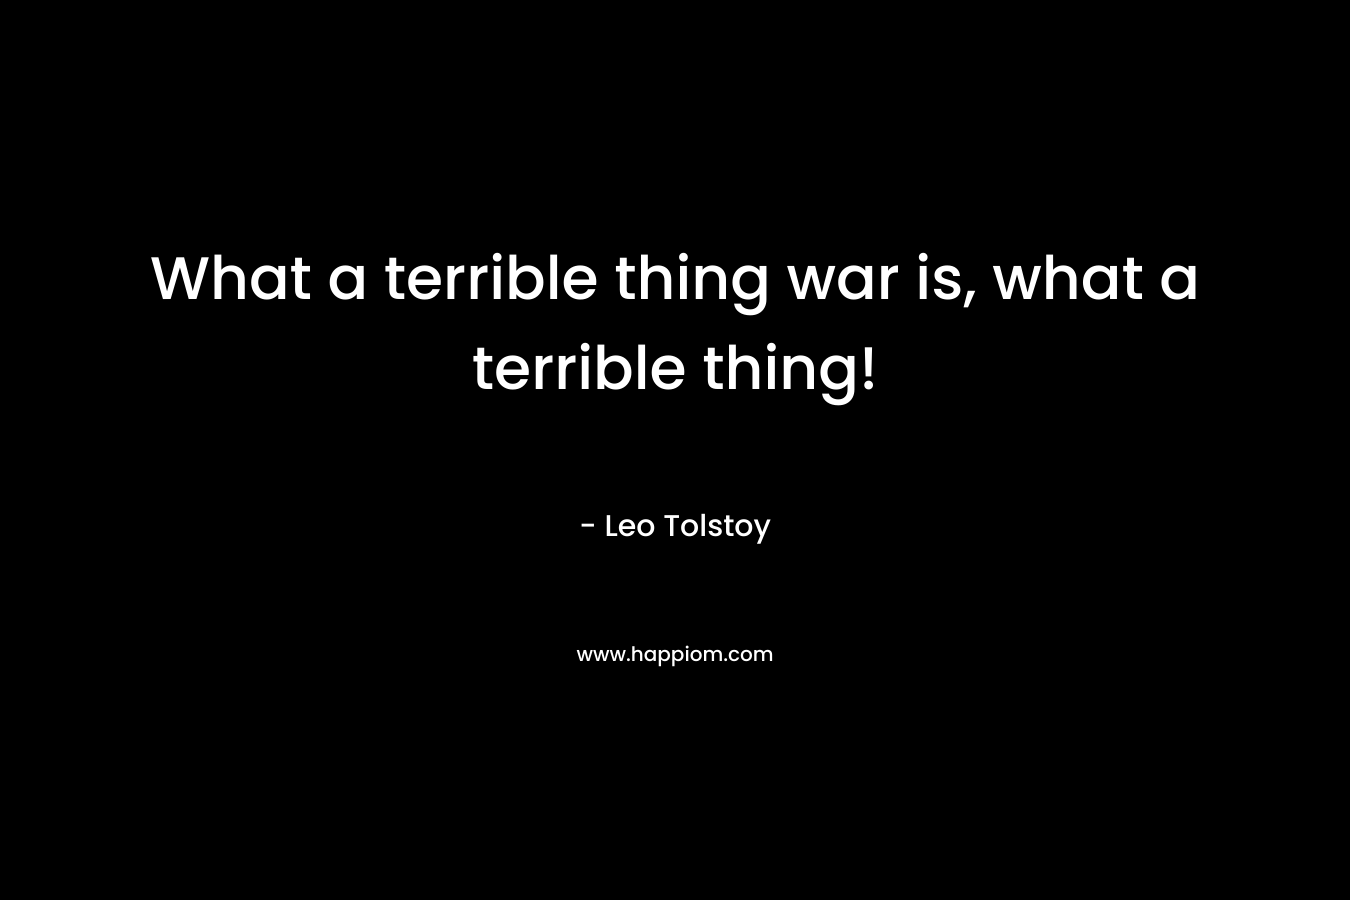 What a terrible thing war is, what a terrible thing!